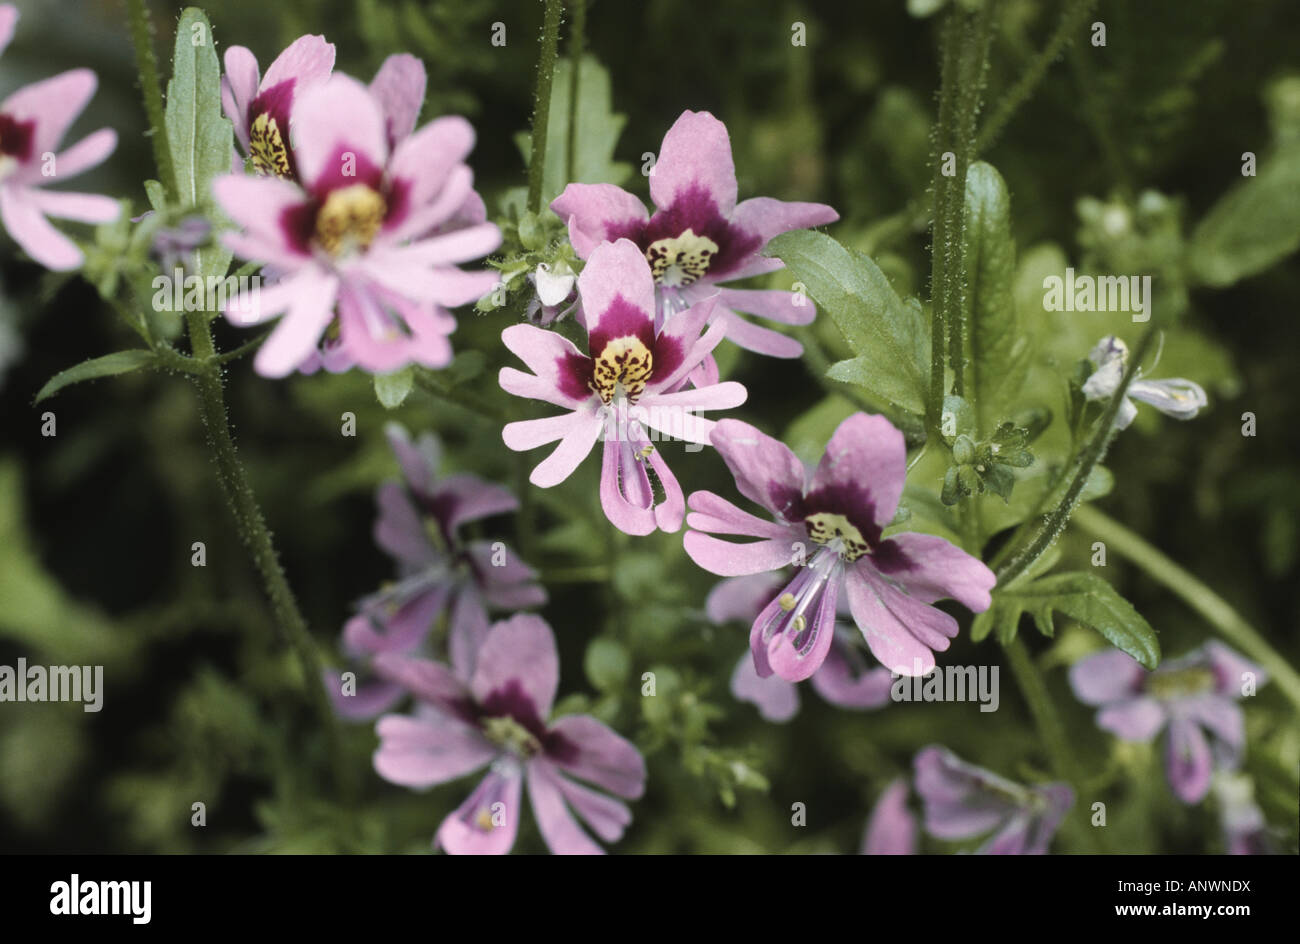 butterfly flower, Poor man's orchid (Schizanthus pinnatus), blooming Stock Photo